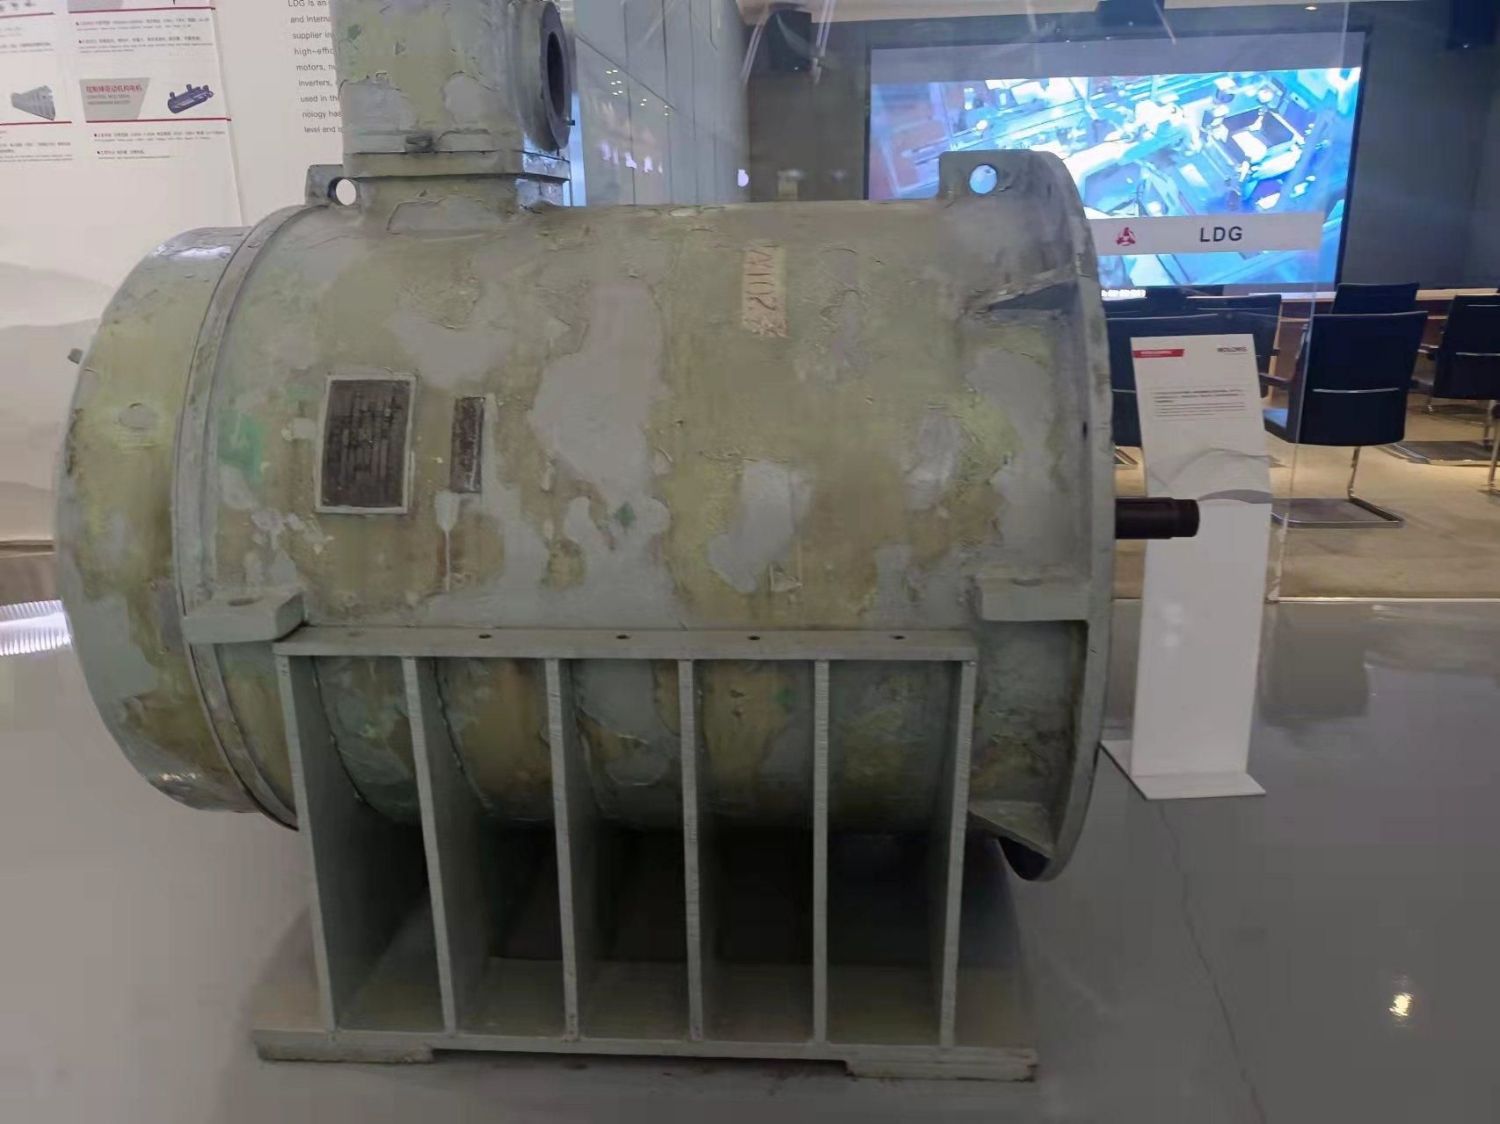 China’s first explosion-proof motor: a milestone in the history of motor manufacturing